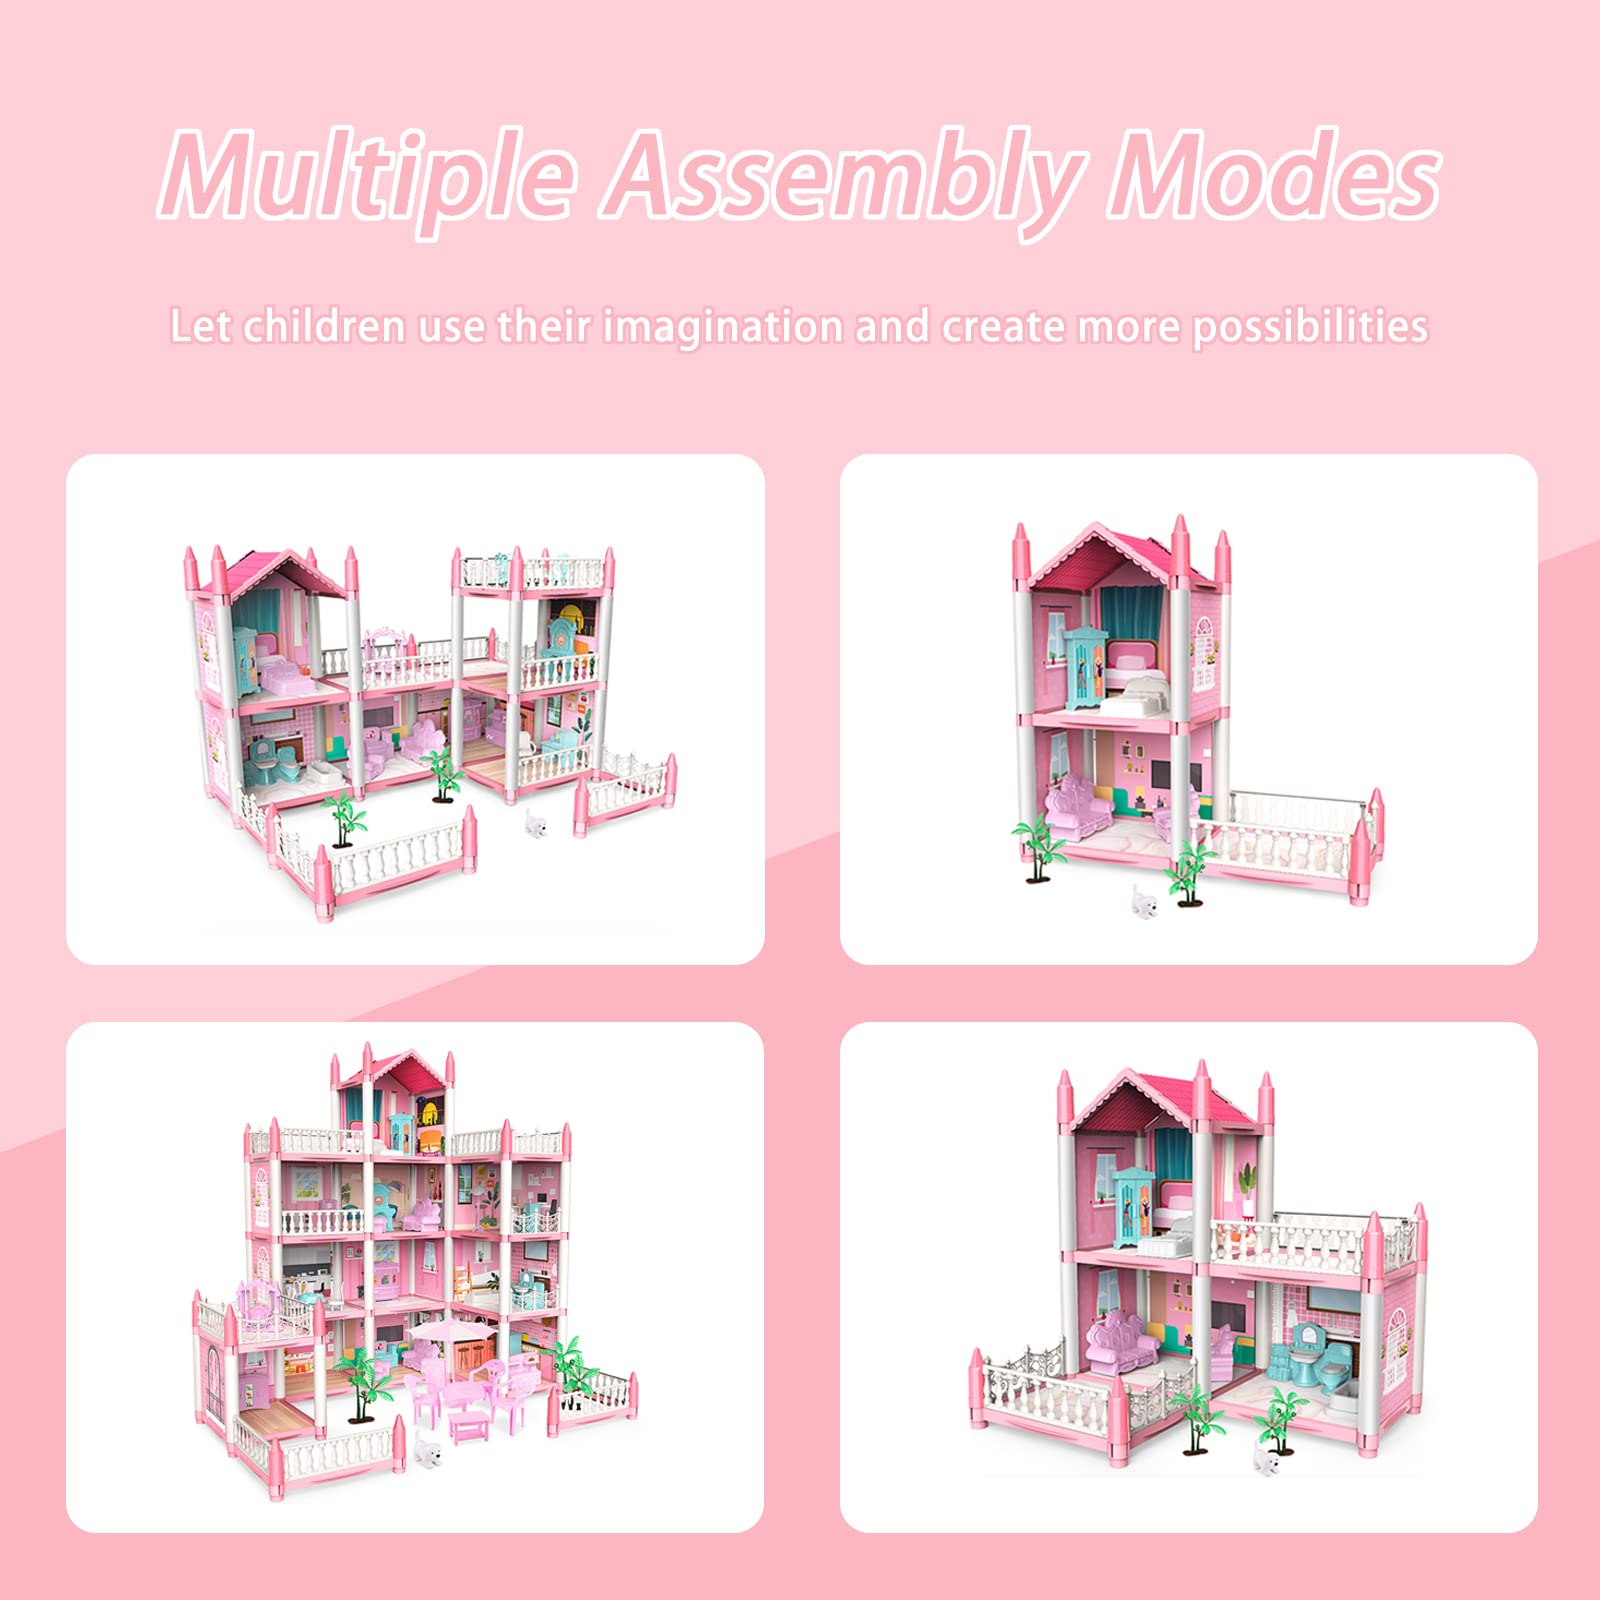 Doll House Set with 11 Rooms and Furniture Accessories, Pink Play Dream House for Girls, DIY Building Pretend Play Doll House Gift Toy for Kids.